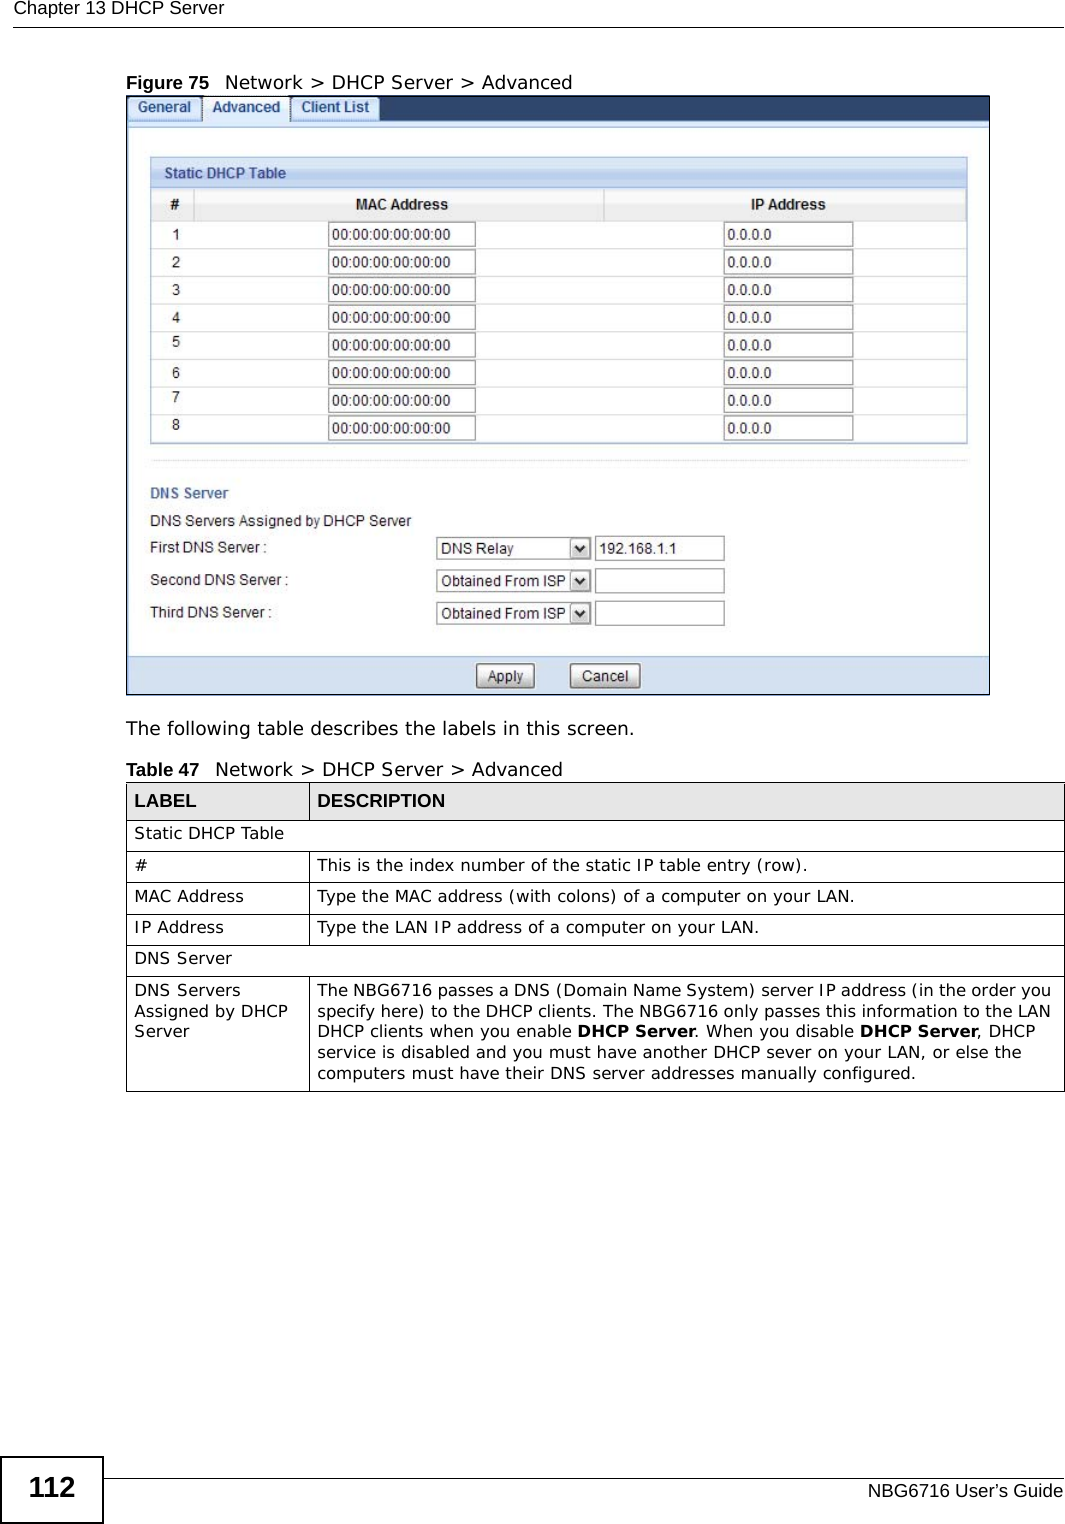 Chapter 13 DHCP ServerNBG6716 User’s Guide112Figure 75   Network &gt; DHCP Server &gt; Advanced The following table describes the labels in this screen.Table 47   Network &gt; DHCP Server &gt; AdvancedLABEL DESCRIPTIONStatic DHCP Table# This is the index number of the static IP table entry (row).MAC Address Type the MAC address (with colons) of a computer on your LAN.IP Address Type the LAN IP address of a computer on your LAN.DNS ServerDNS Servers Assigned by DHCP Server The NBG6716 passes a DNS (Domain Name System) server IP address (in the order you specify here) to the DHCP clients. The NBG6716 only passes this information to the LAN DHCP clients when you enable DHCP Server. When you disable DHCP Server, DHCP service is disabled and you must have another DHCP sever on your LAN, or else the computers must have their DNS server addresses manually configured.